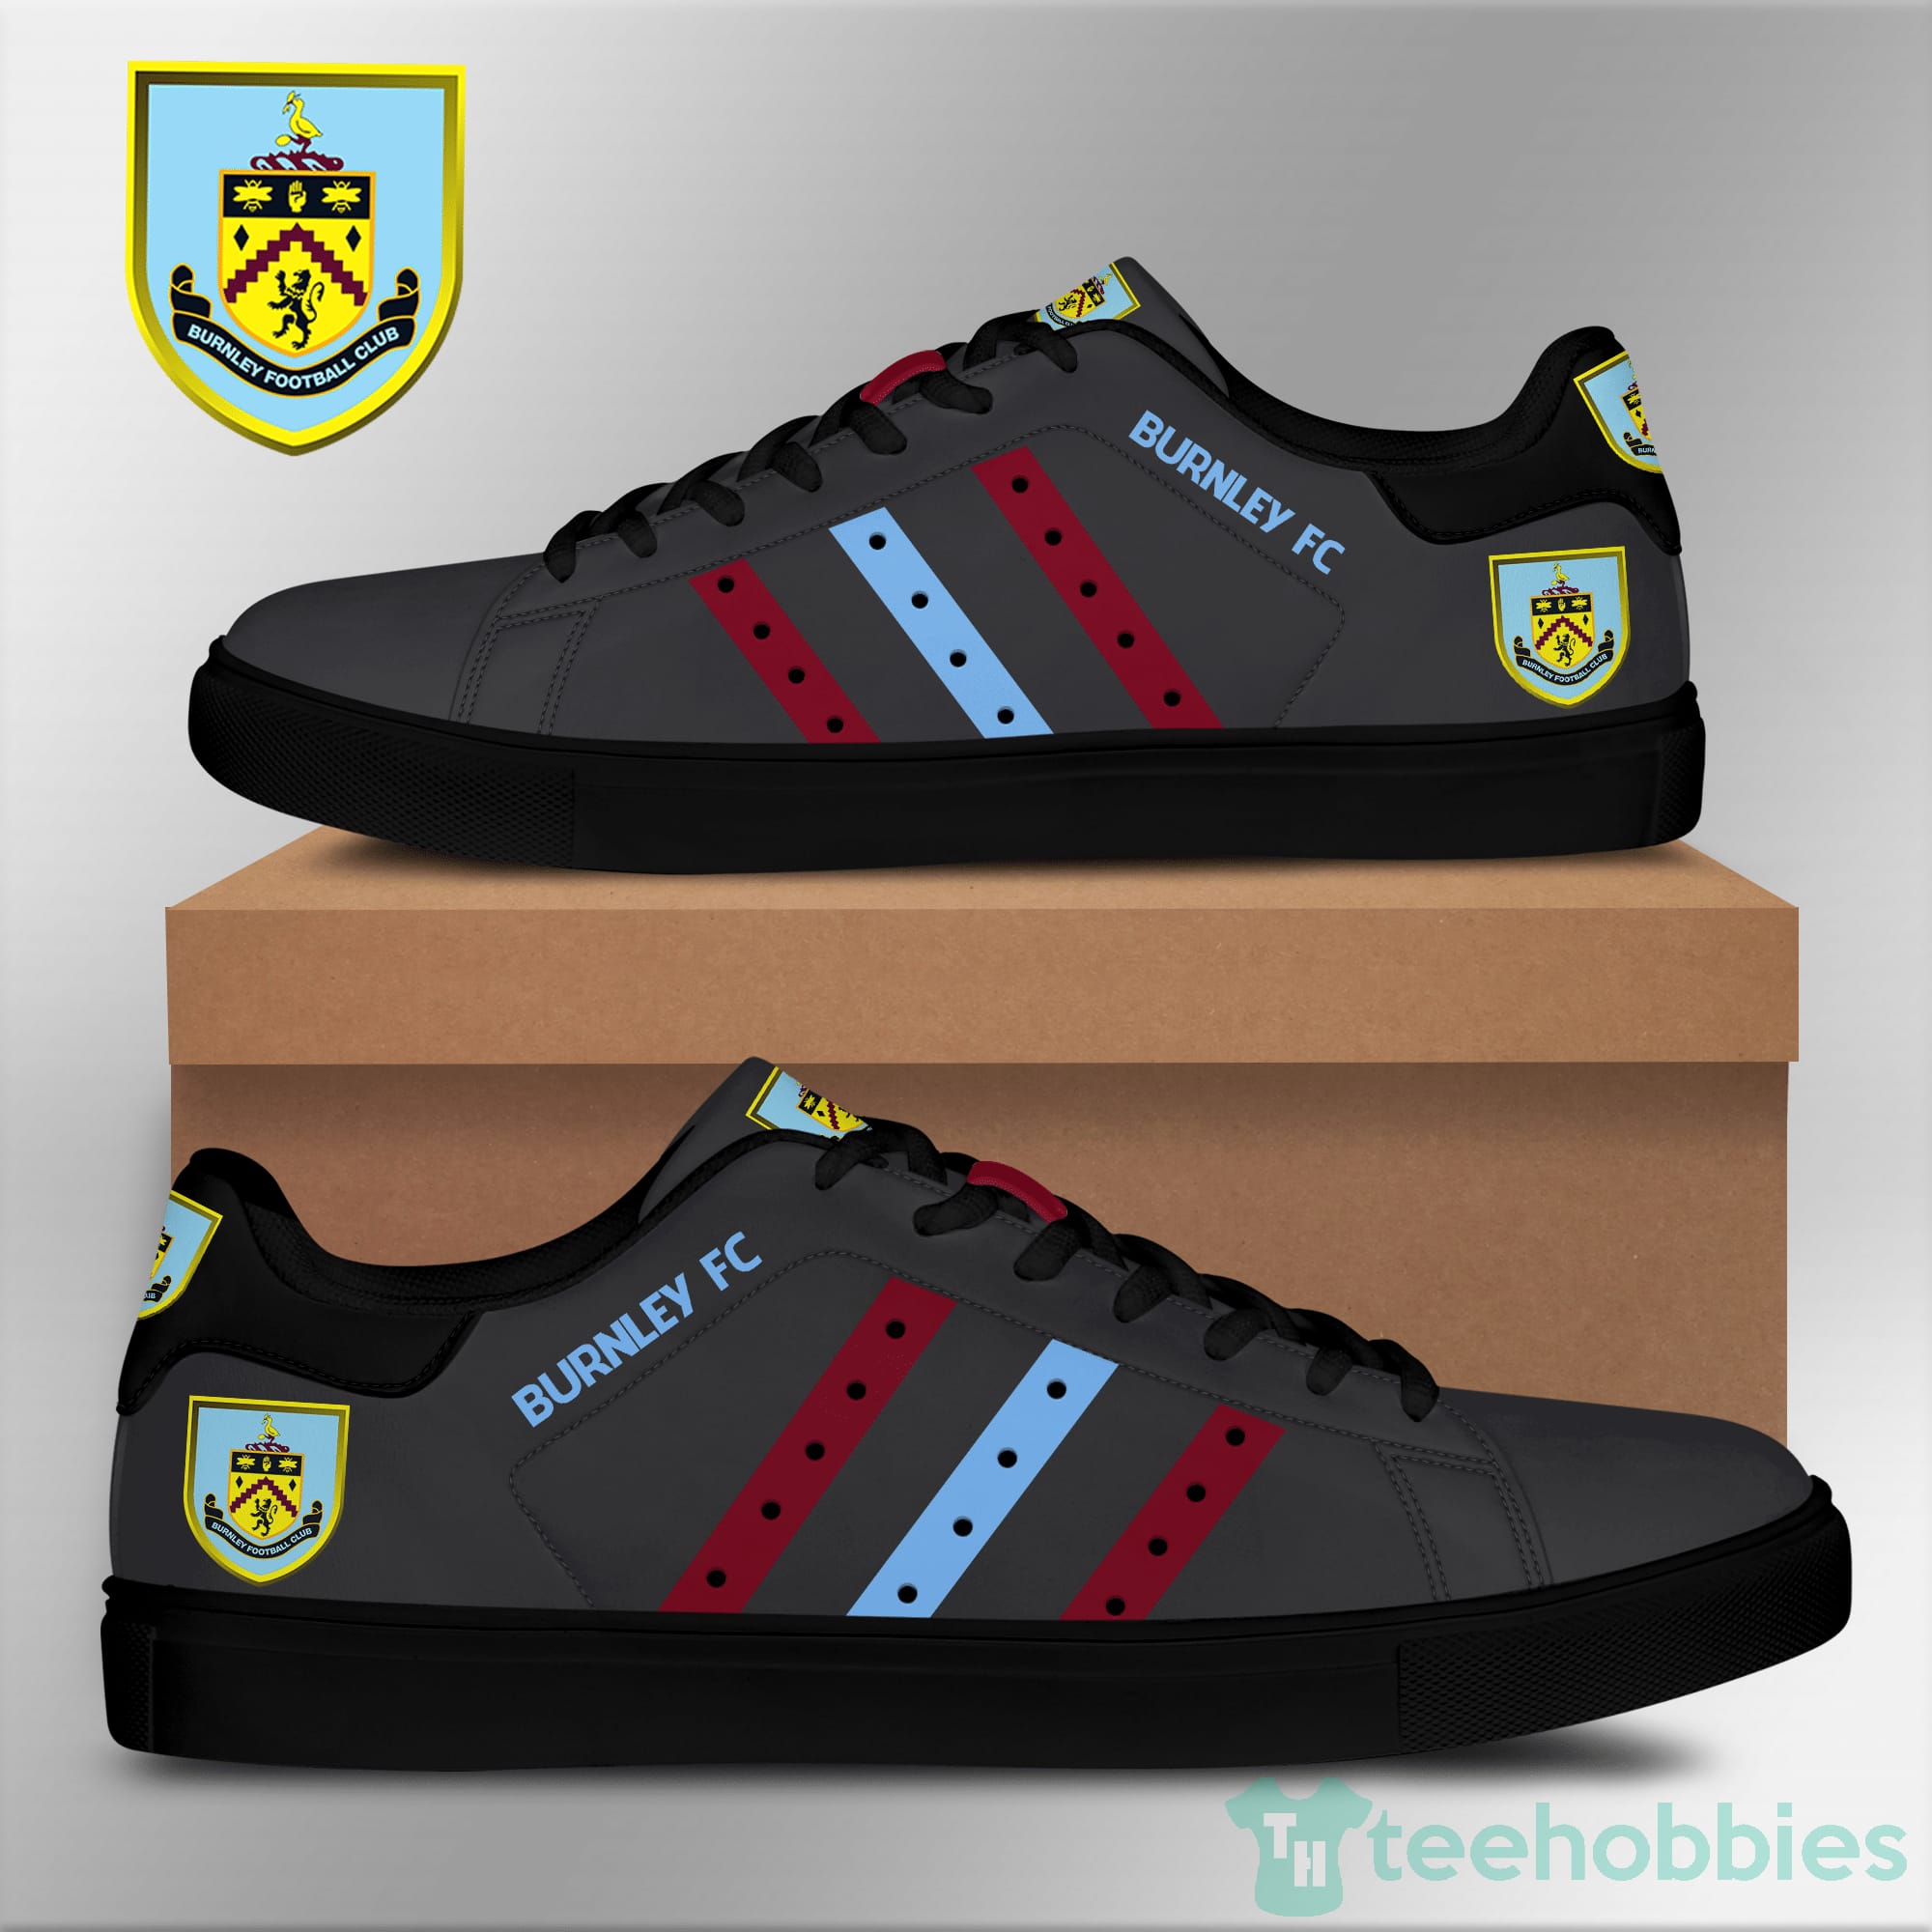 Burnley F.C Brown Low Top Skate Shoes Product photo 2